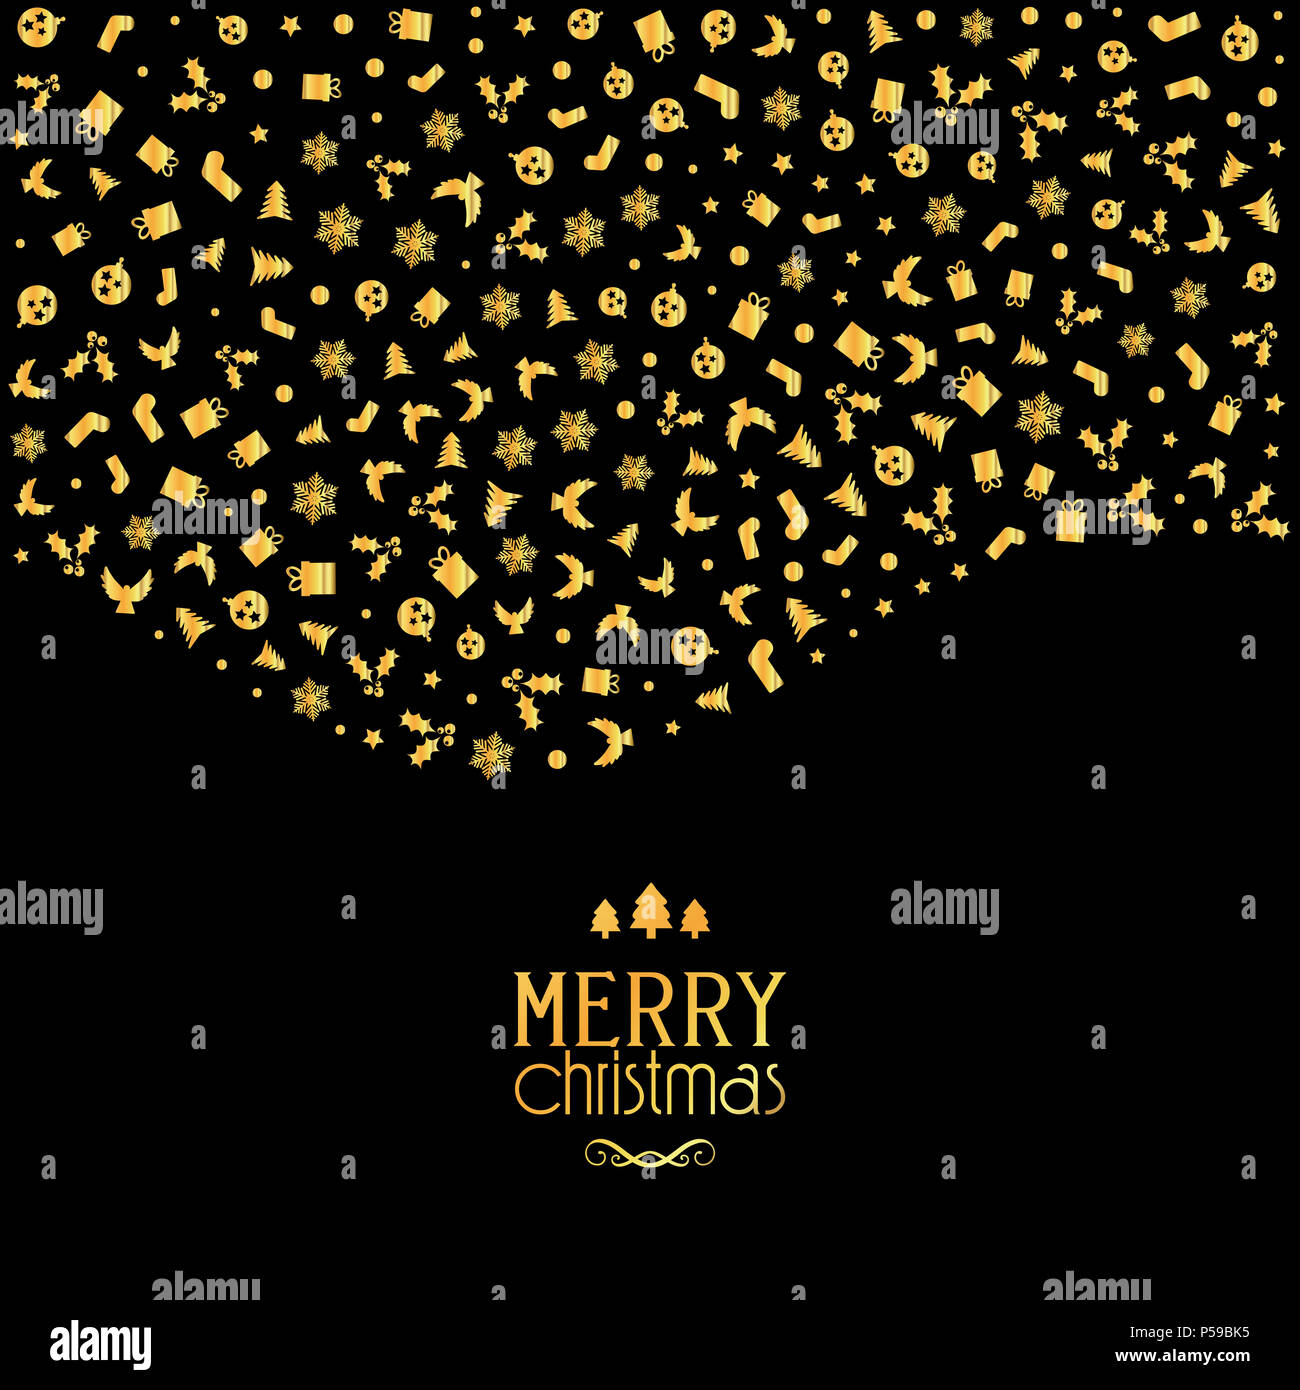 Christmas background with festive icons in metallic gold colours Stock Photo